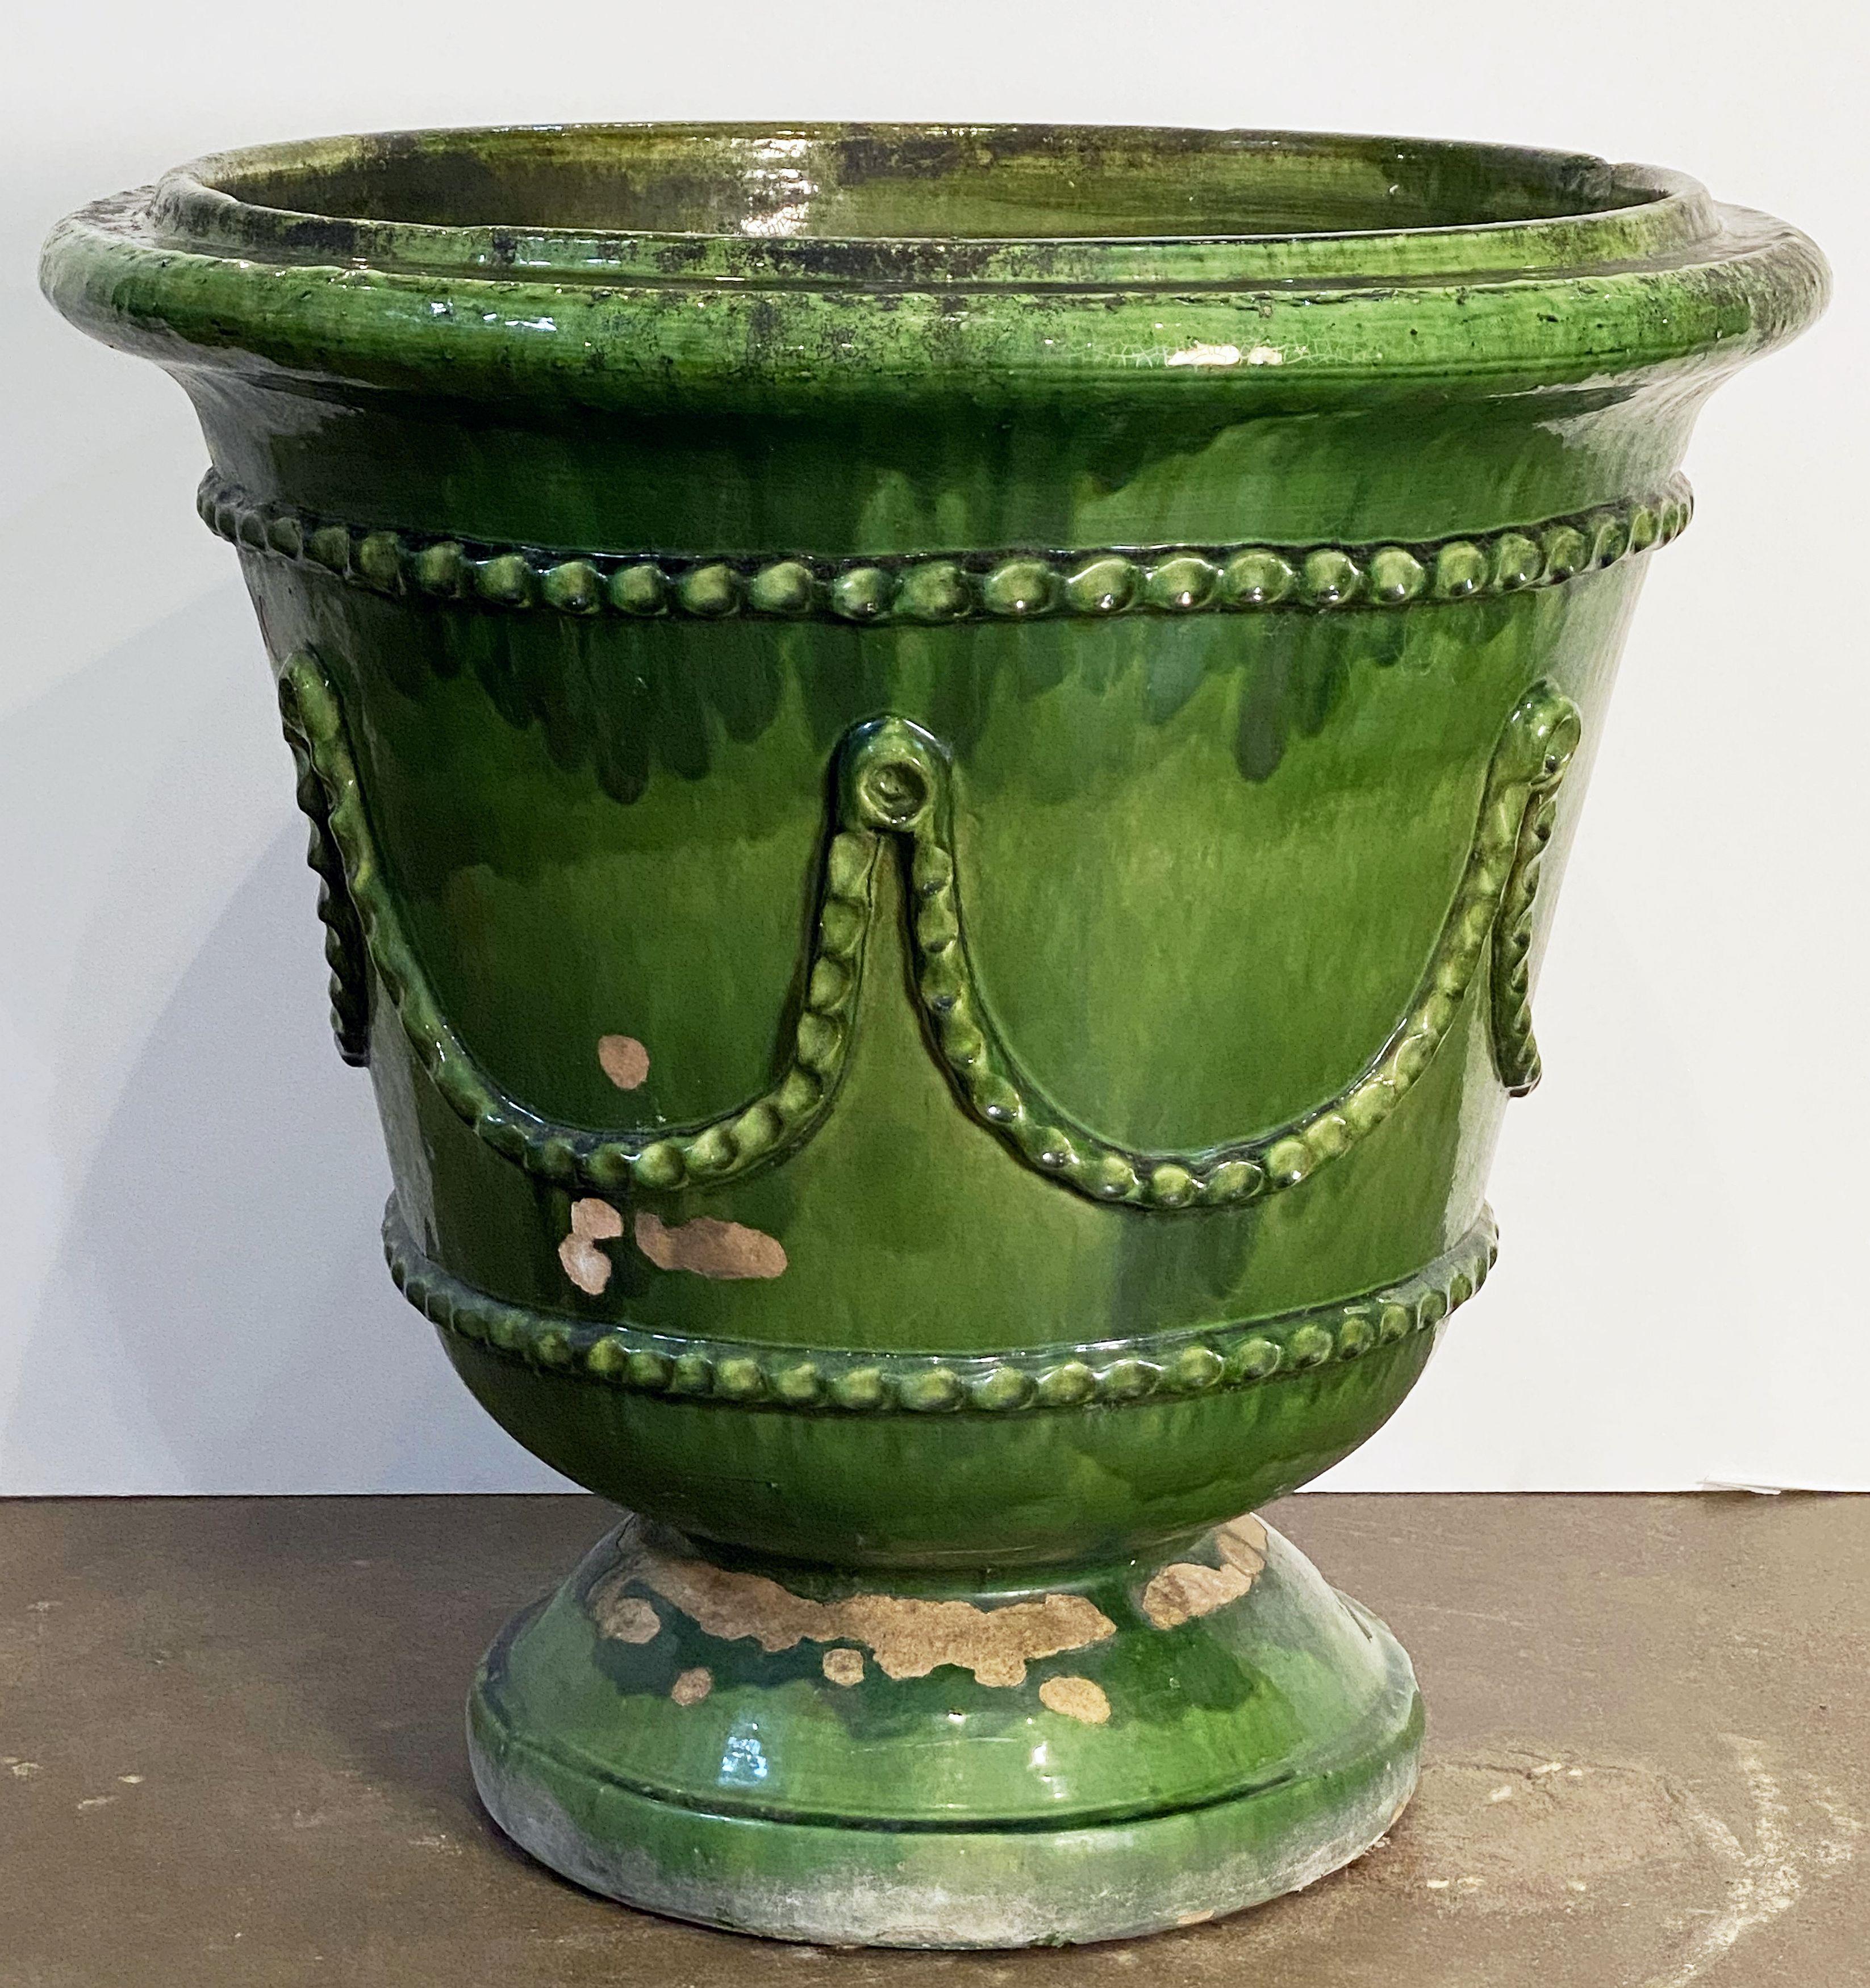 Large Glazed Earthenware Castelnaudary-Style Urn or Planter Pot from France For Sale 5